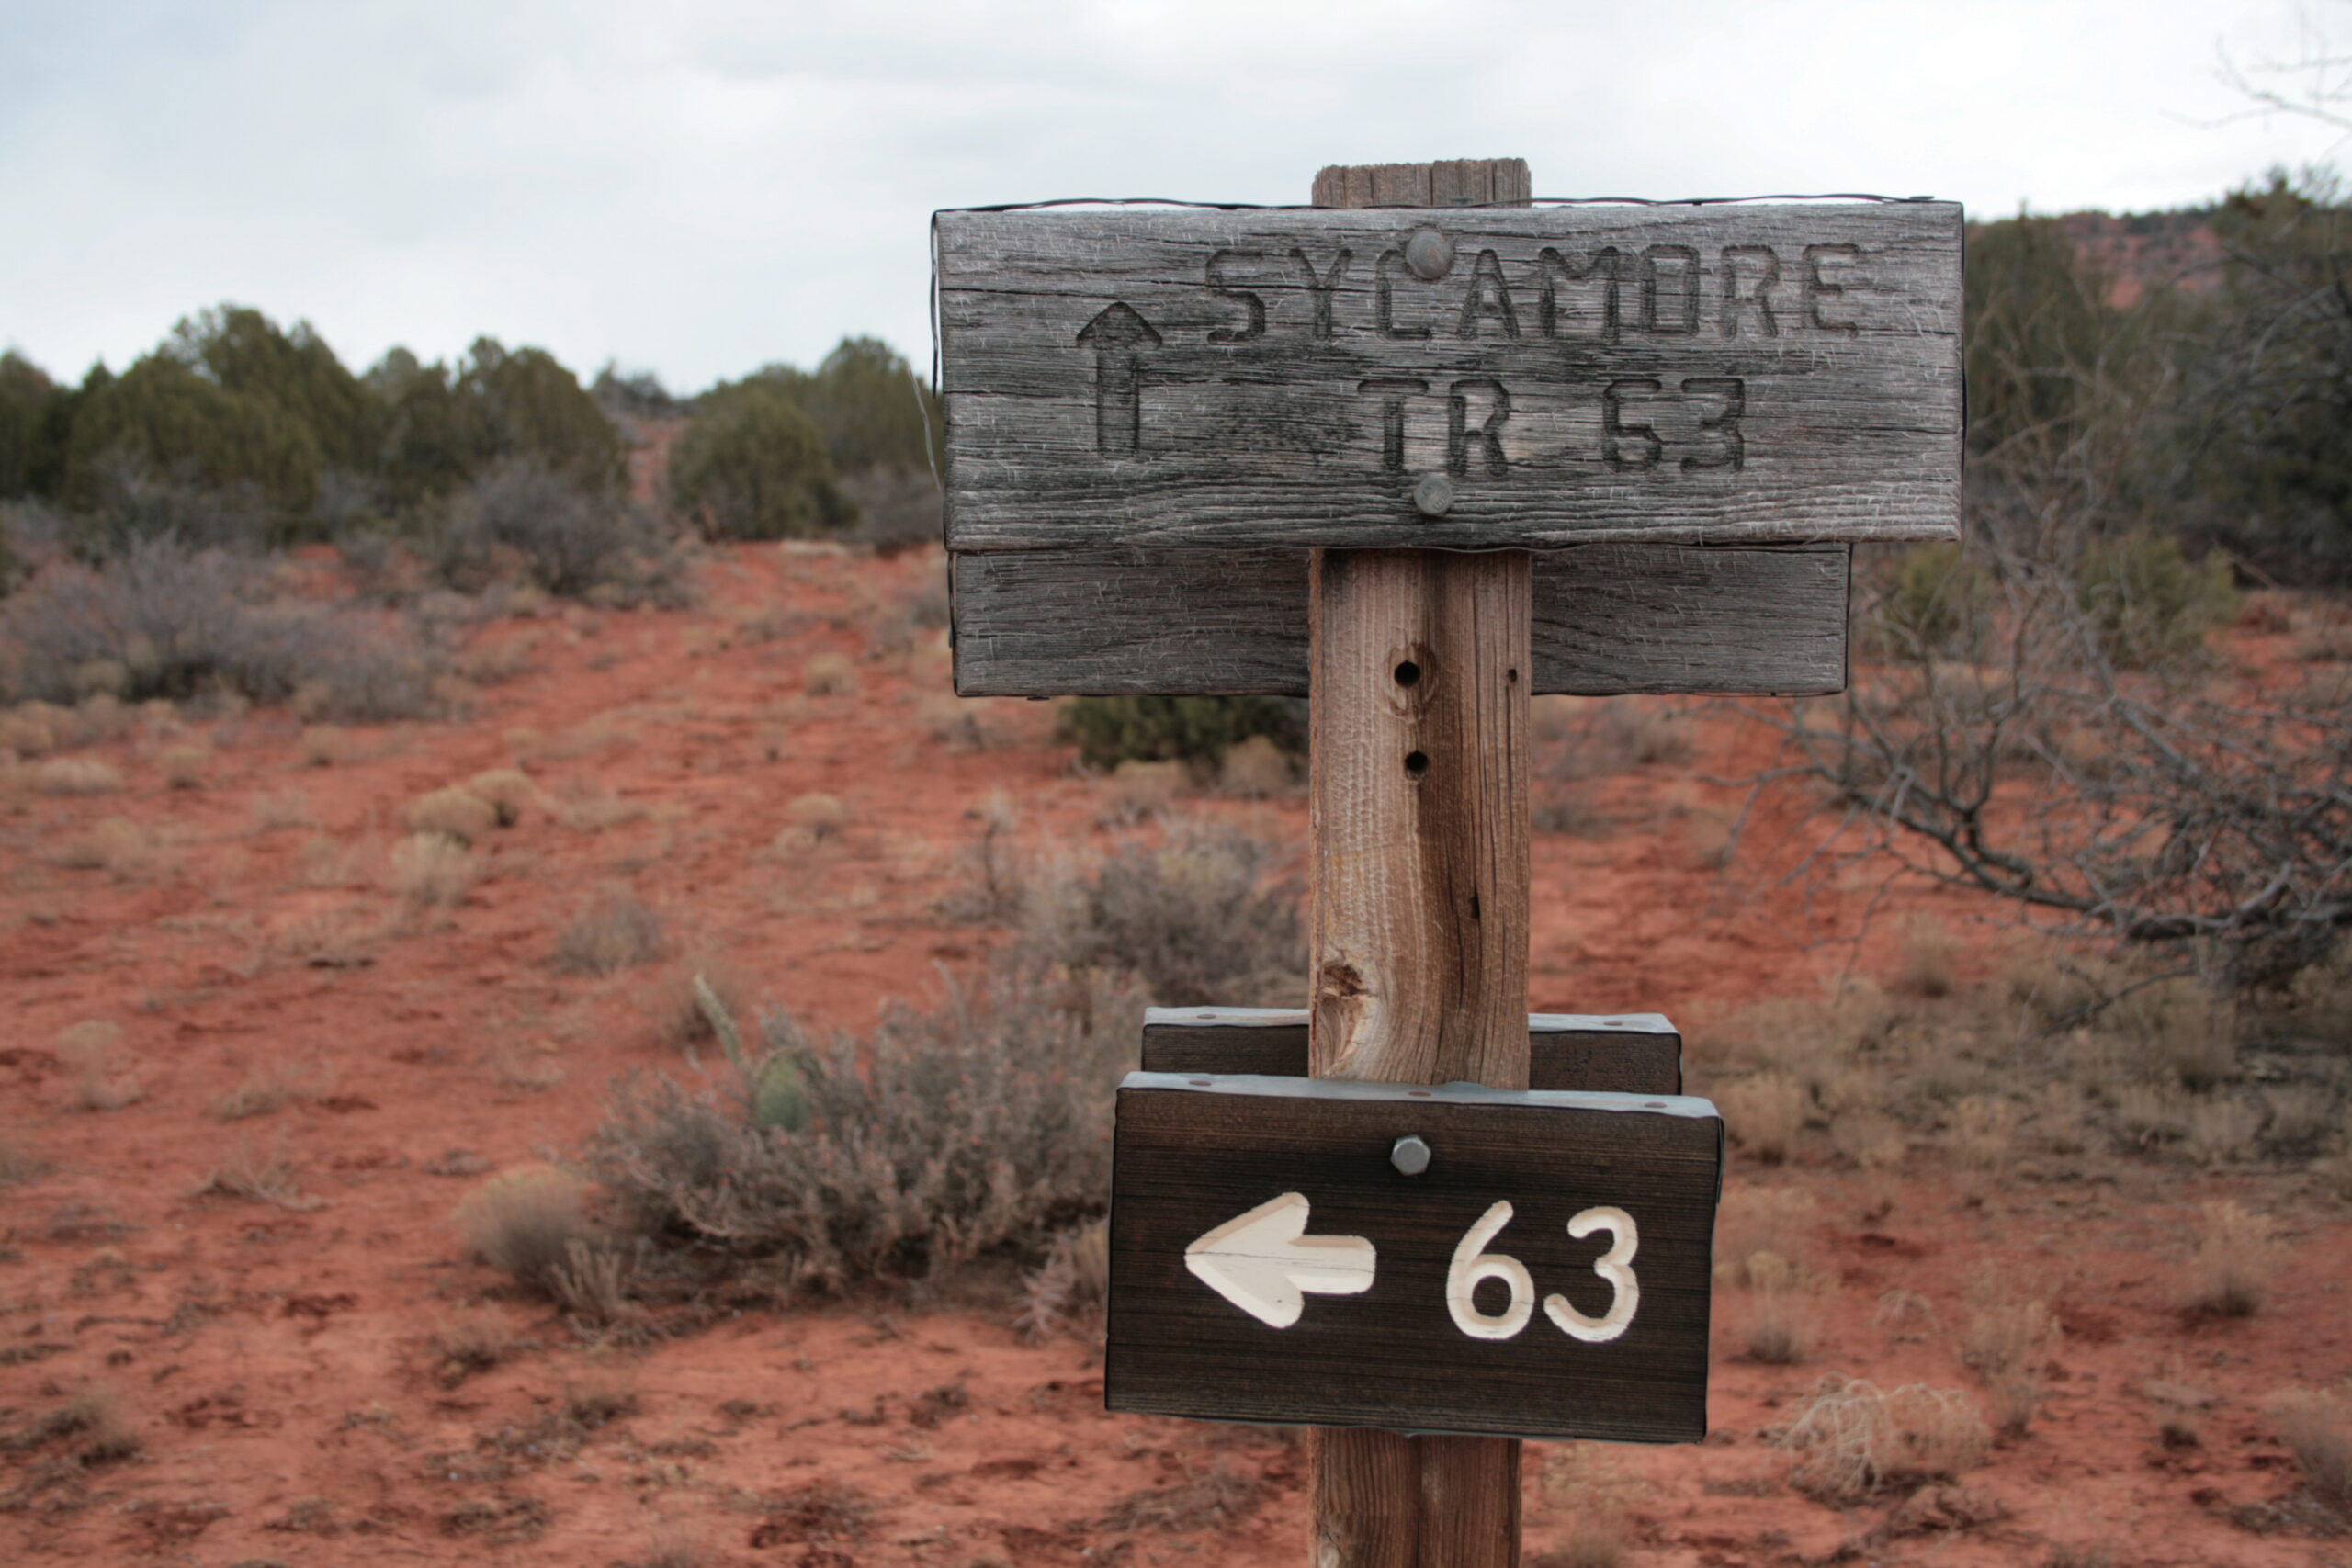 An exceptionally confusing trail sign near Sycamore Canyon, Arizona.